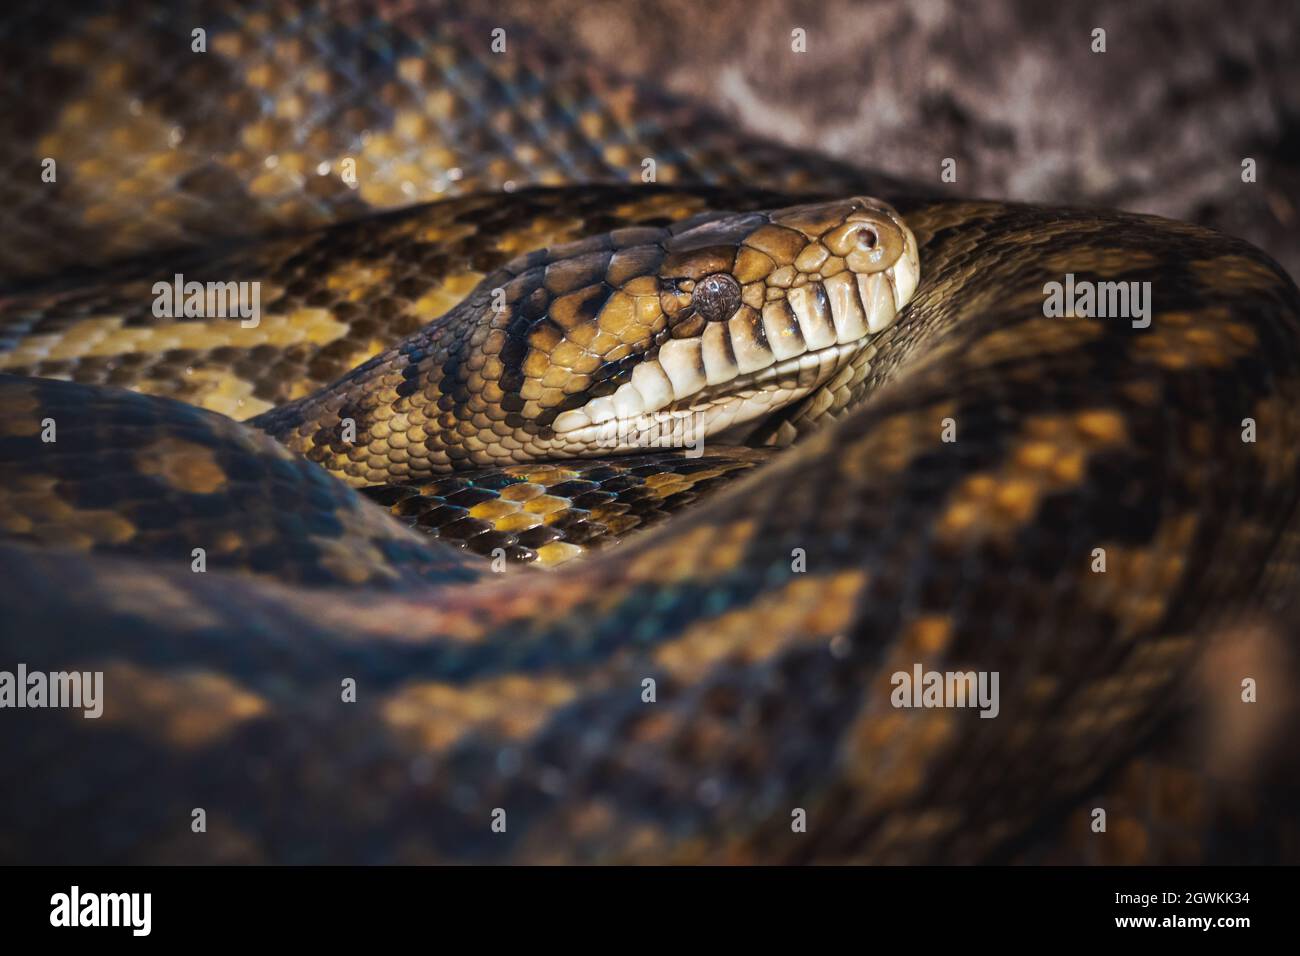 large snake lies curled up in rings Stock Photo